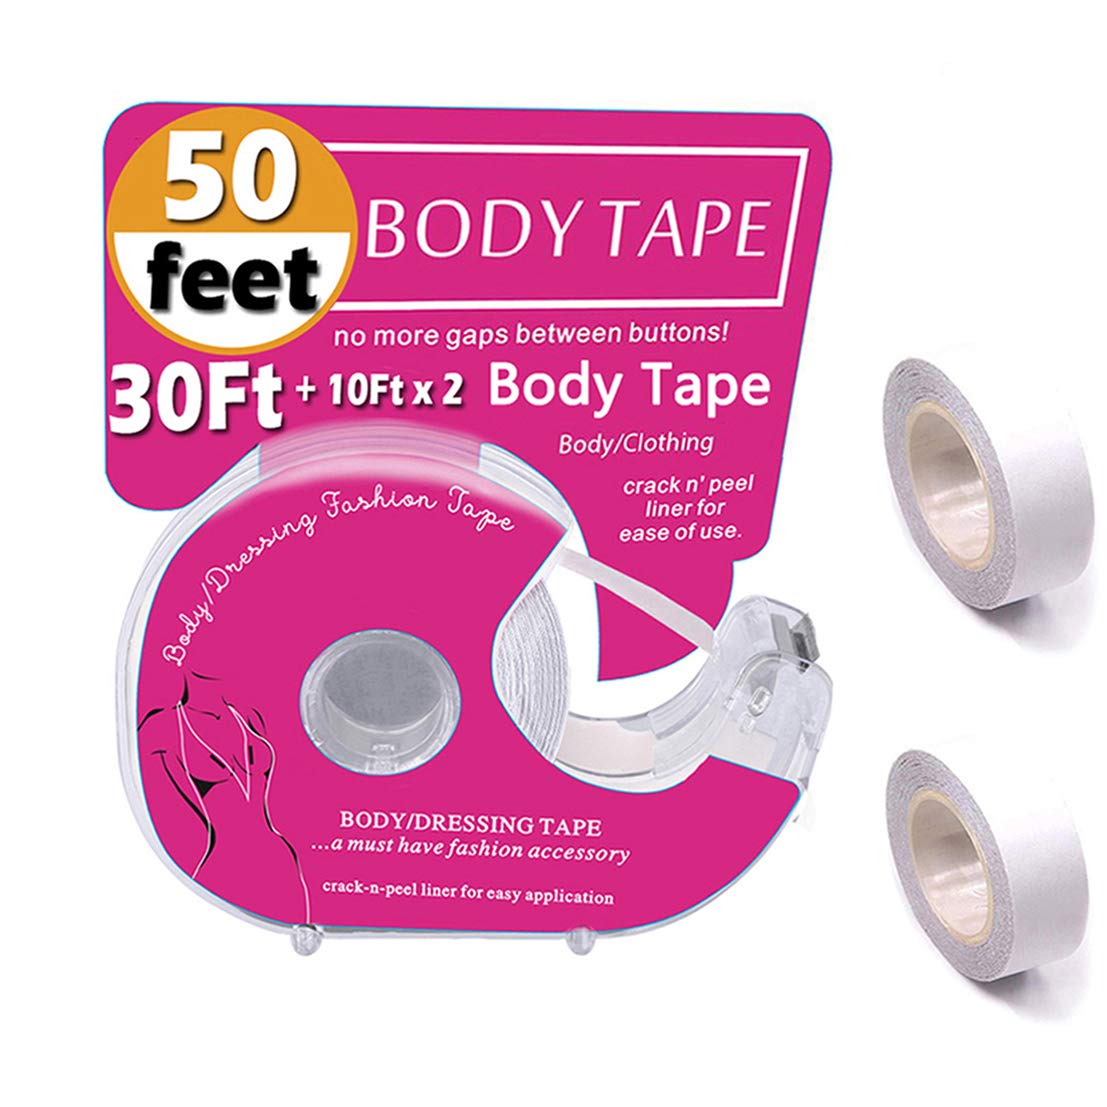 Price:$9.99    Fashion Boob Body Tape,Clear Fabric Strong Double Sided Tape for Clothes/Dress, 50 Ft.  Clothing